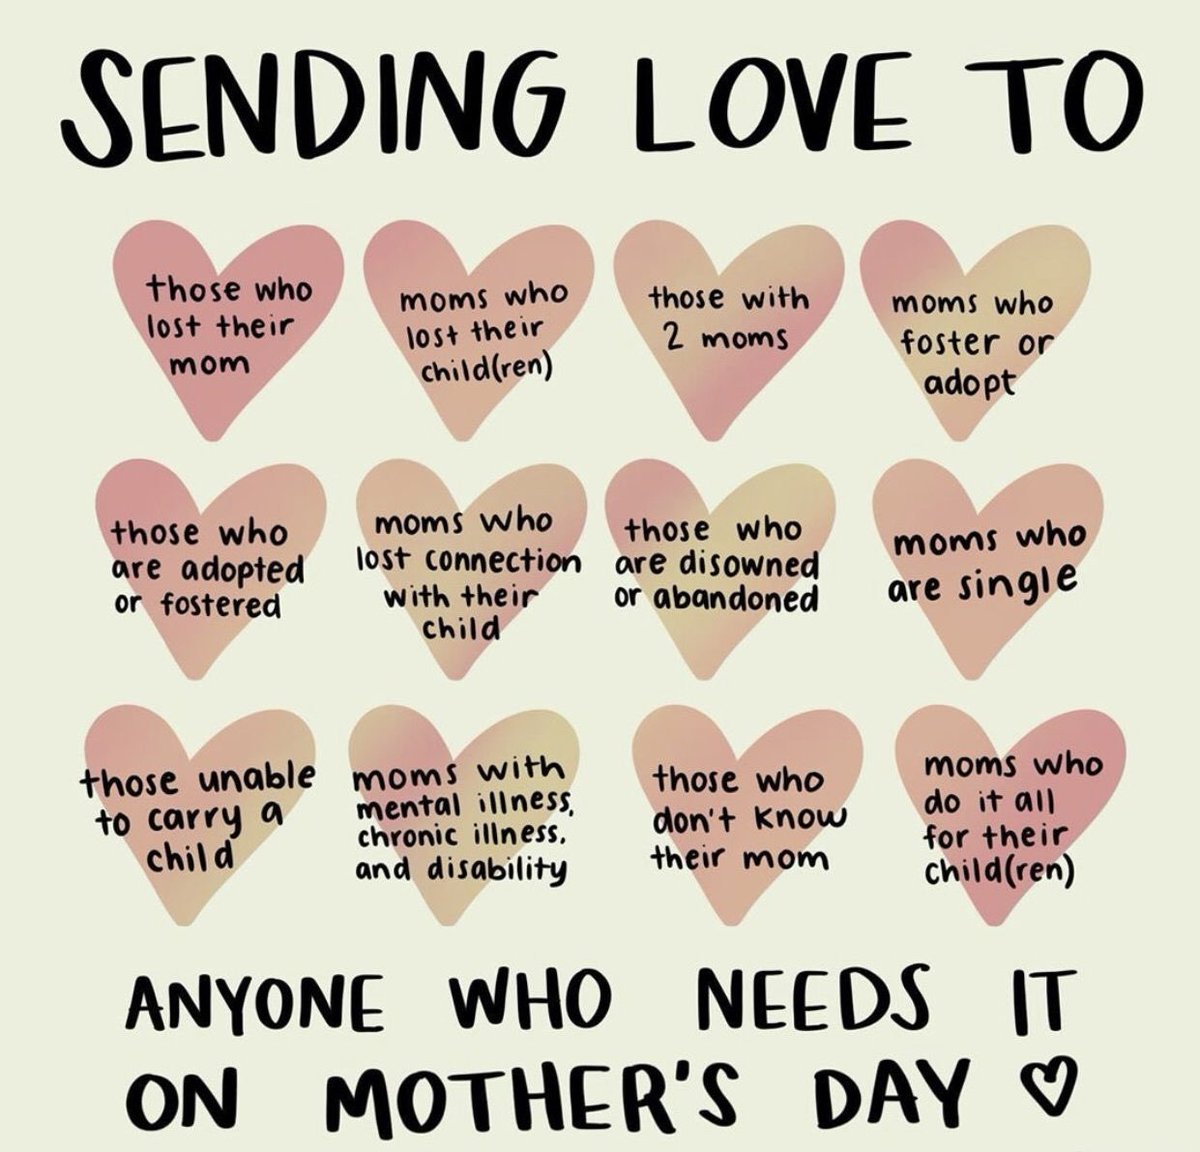 Happy Mother’s day to all who celebrate — here’s a reminder to be gentle with folks today and extend empathy and kindness to others: